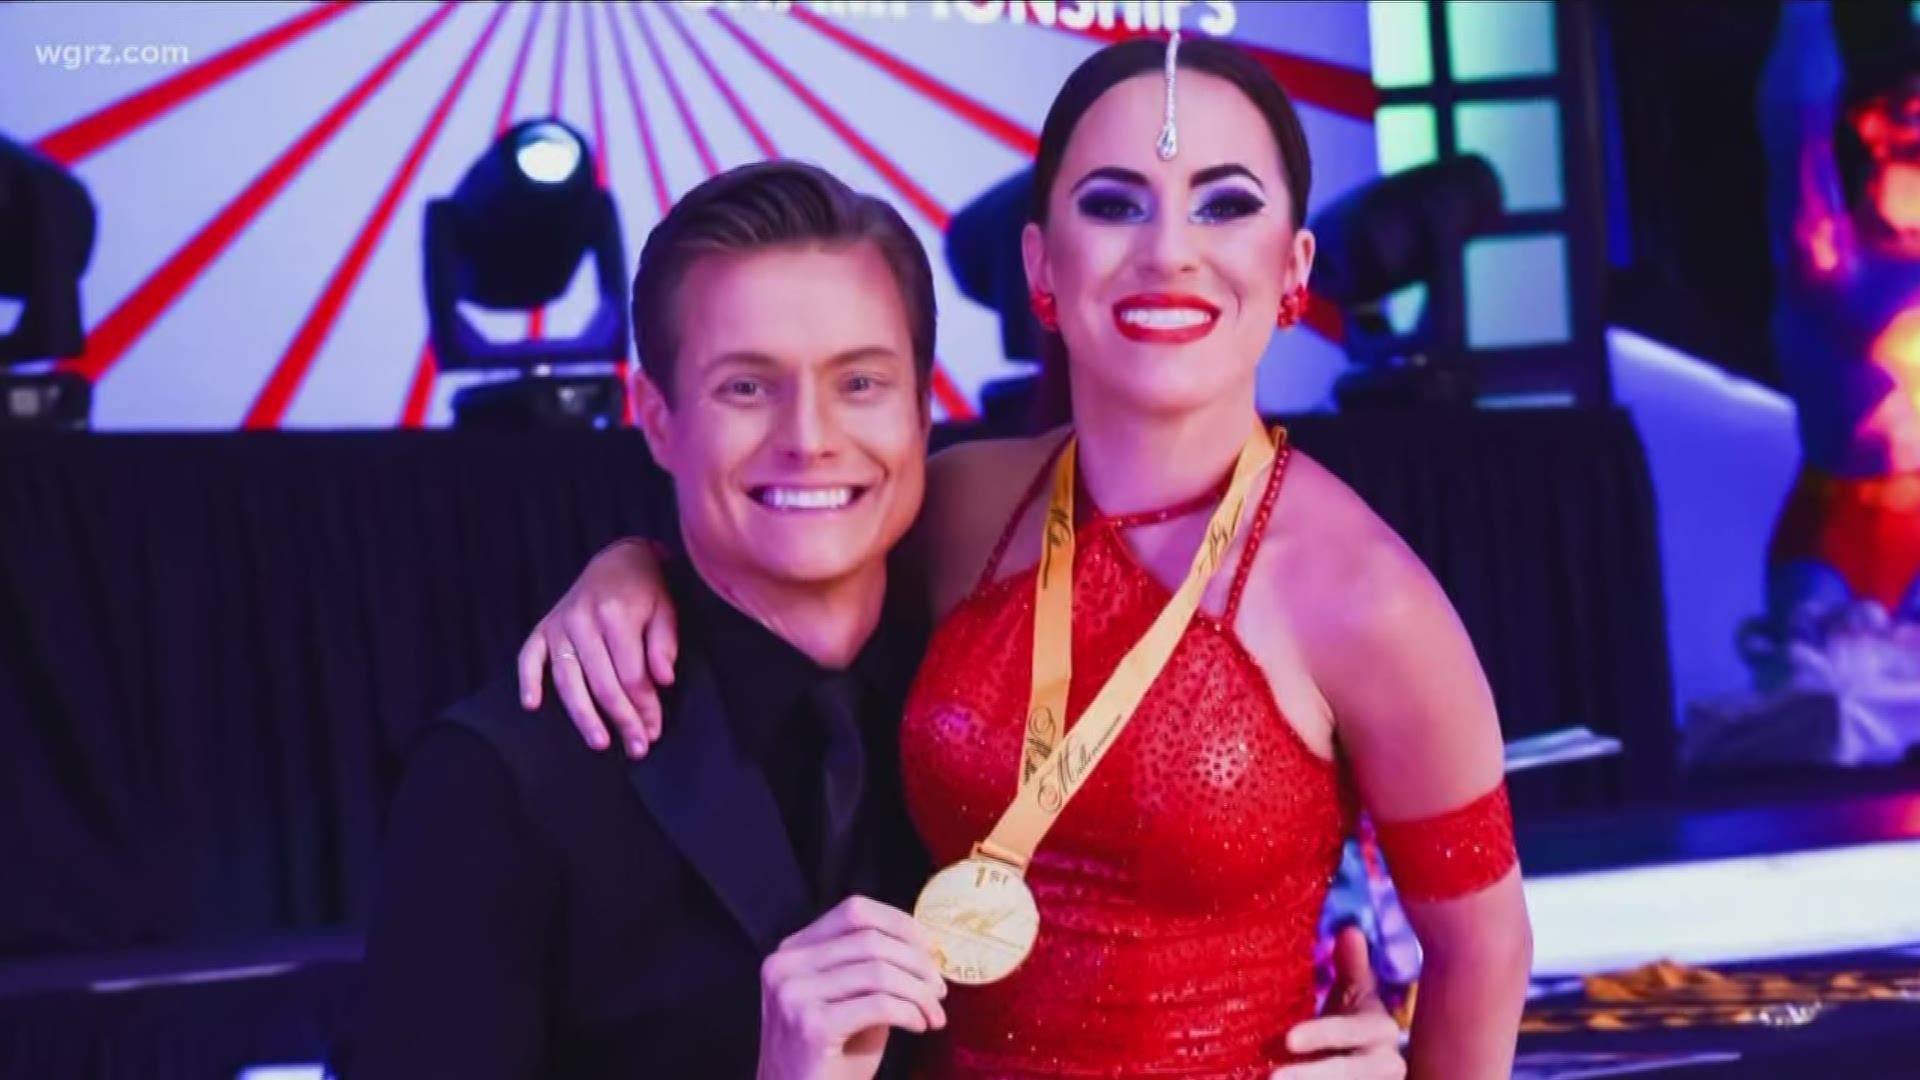 Lauren Wailer and former Dancing with the Stars dancer Mayo Alanen are conquering the ballroom dance circuit